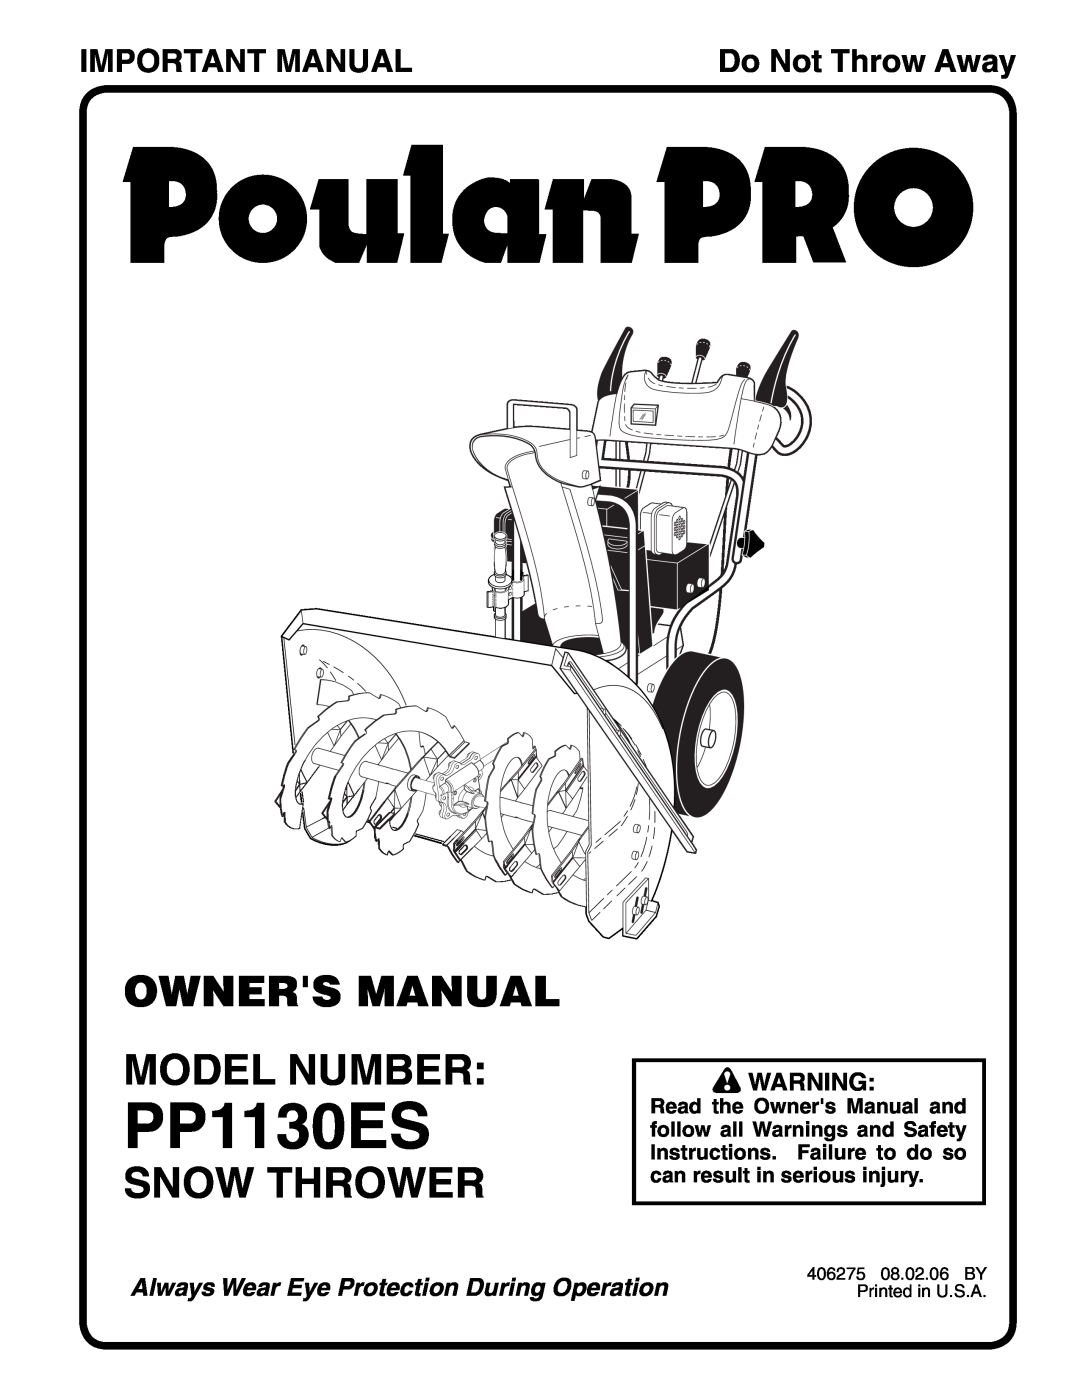 Poulan 406275, 96192001300 owner manual Snow Thrower, Important Manual, PP1130ES, Do Not Throw Away 